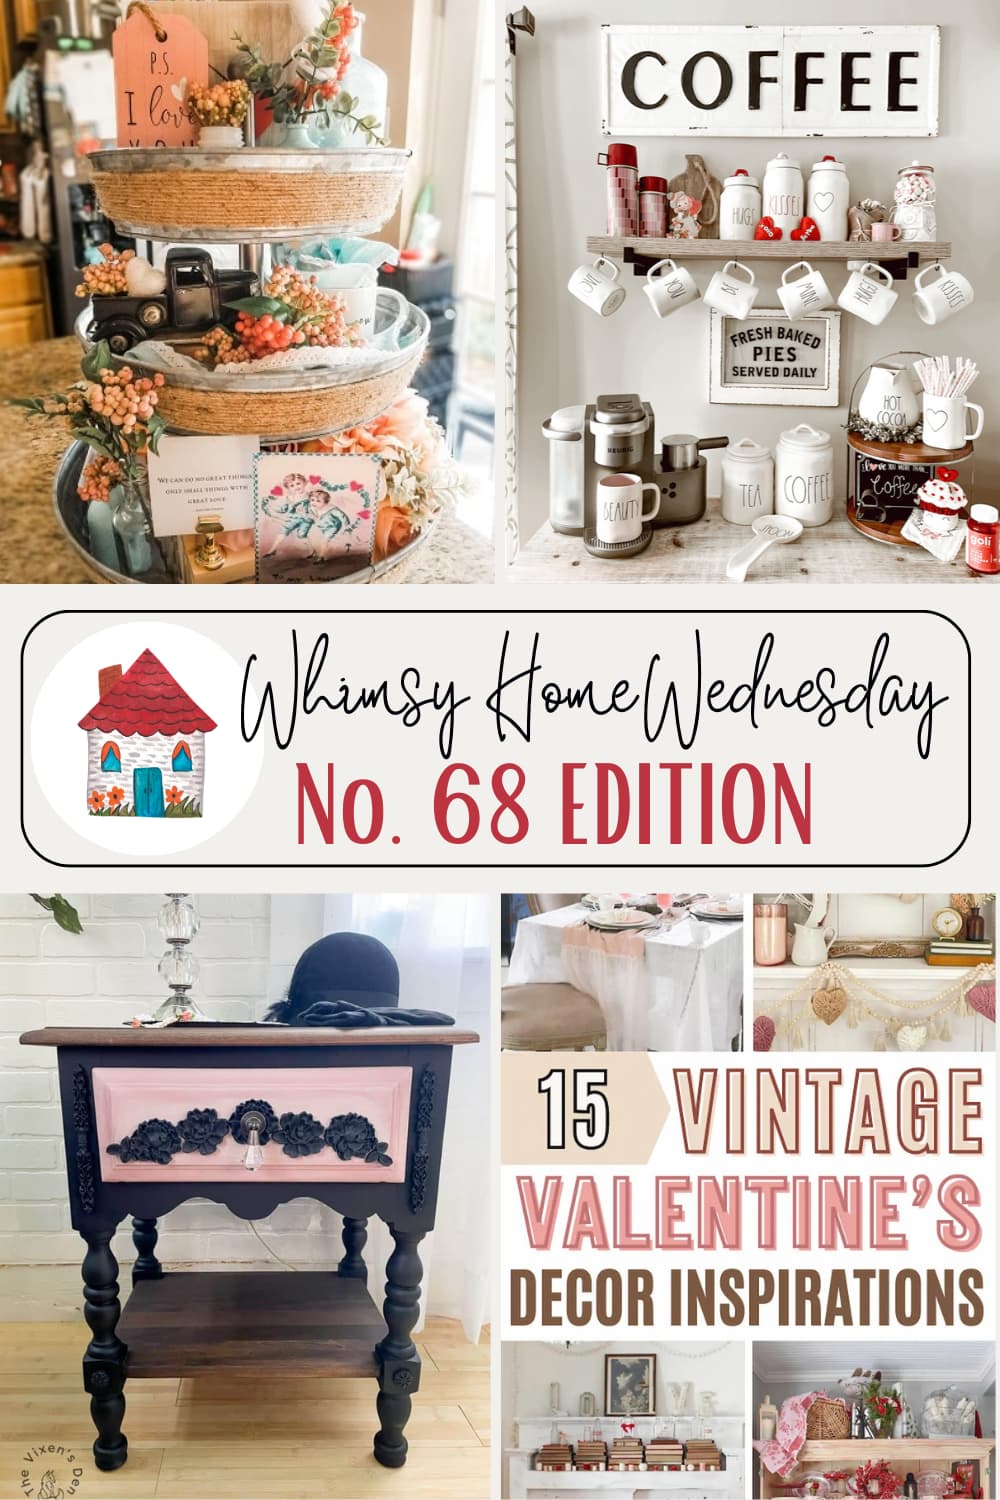 Whimsy Home Wednesday Blog Link Party No. 68